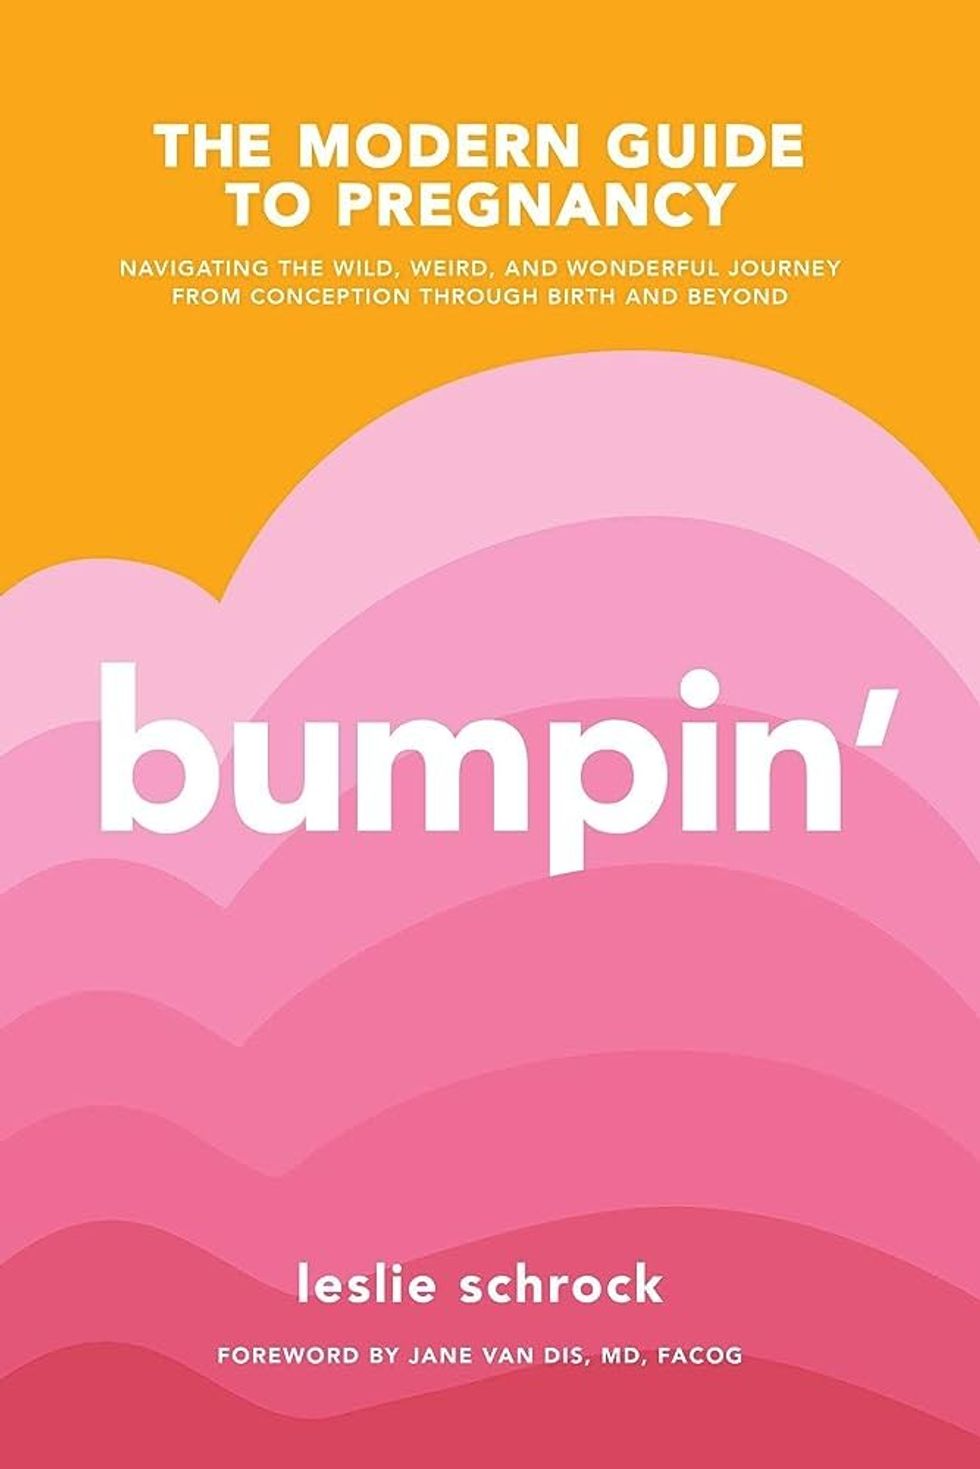 Bumpin': The Modern Guide to Pregnancy ($11)